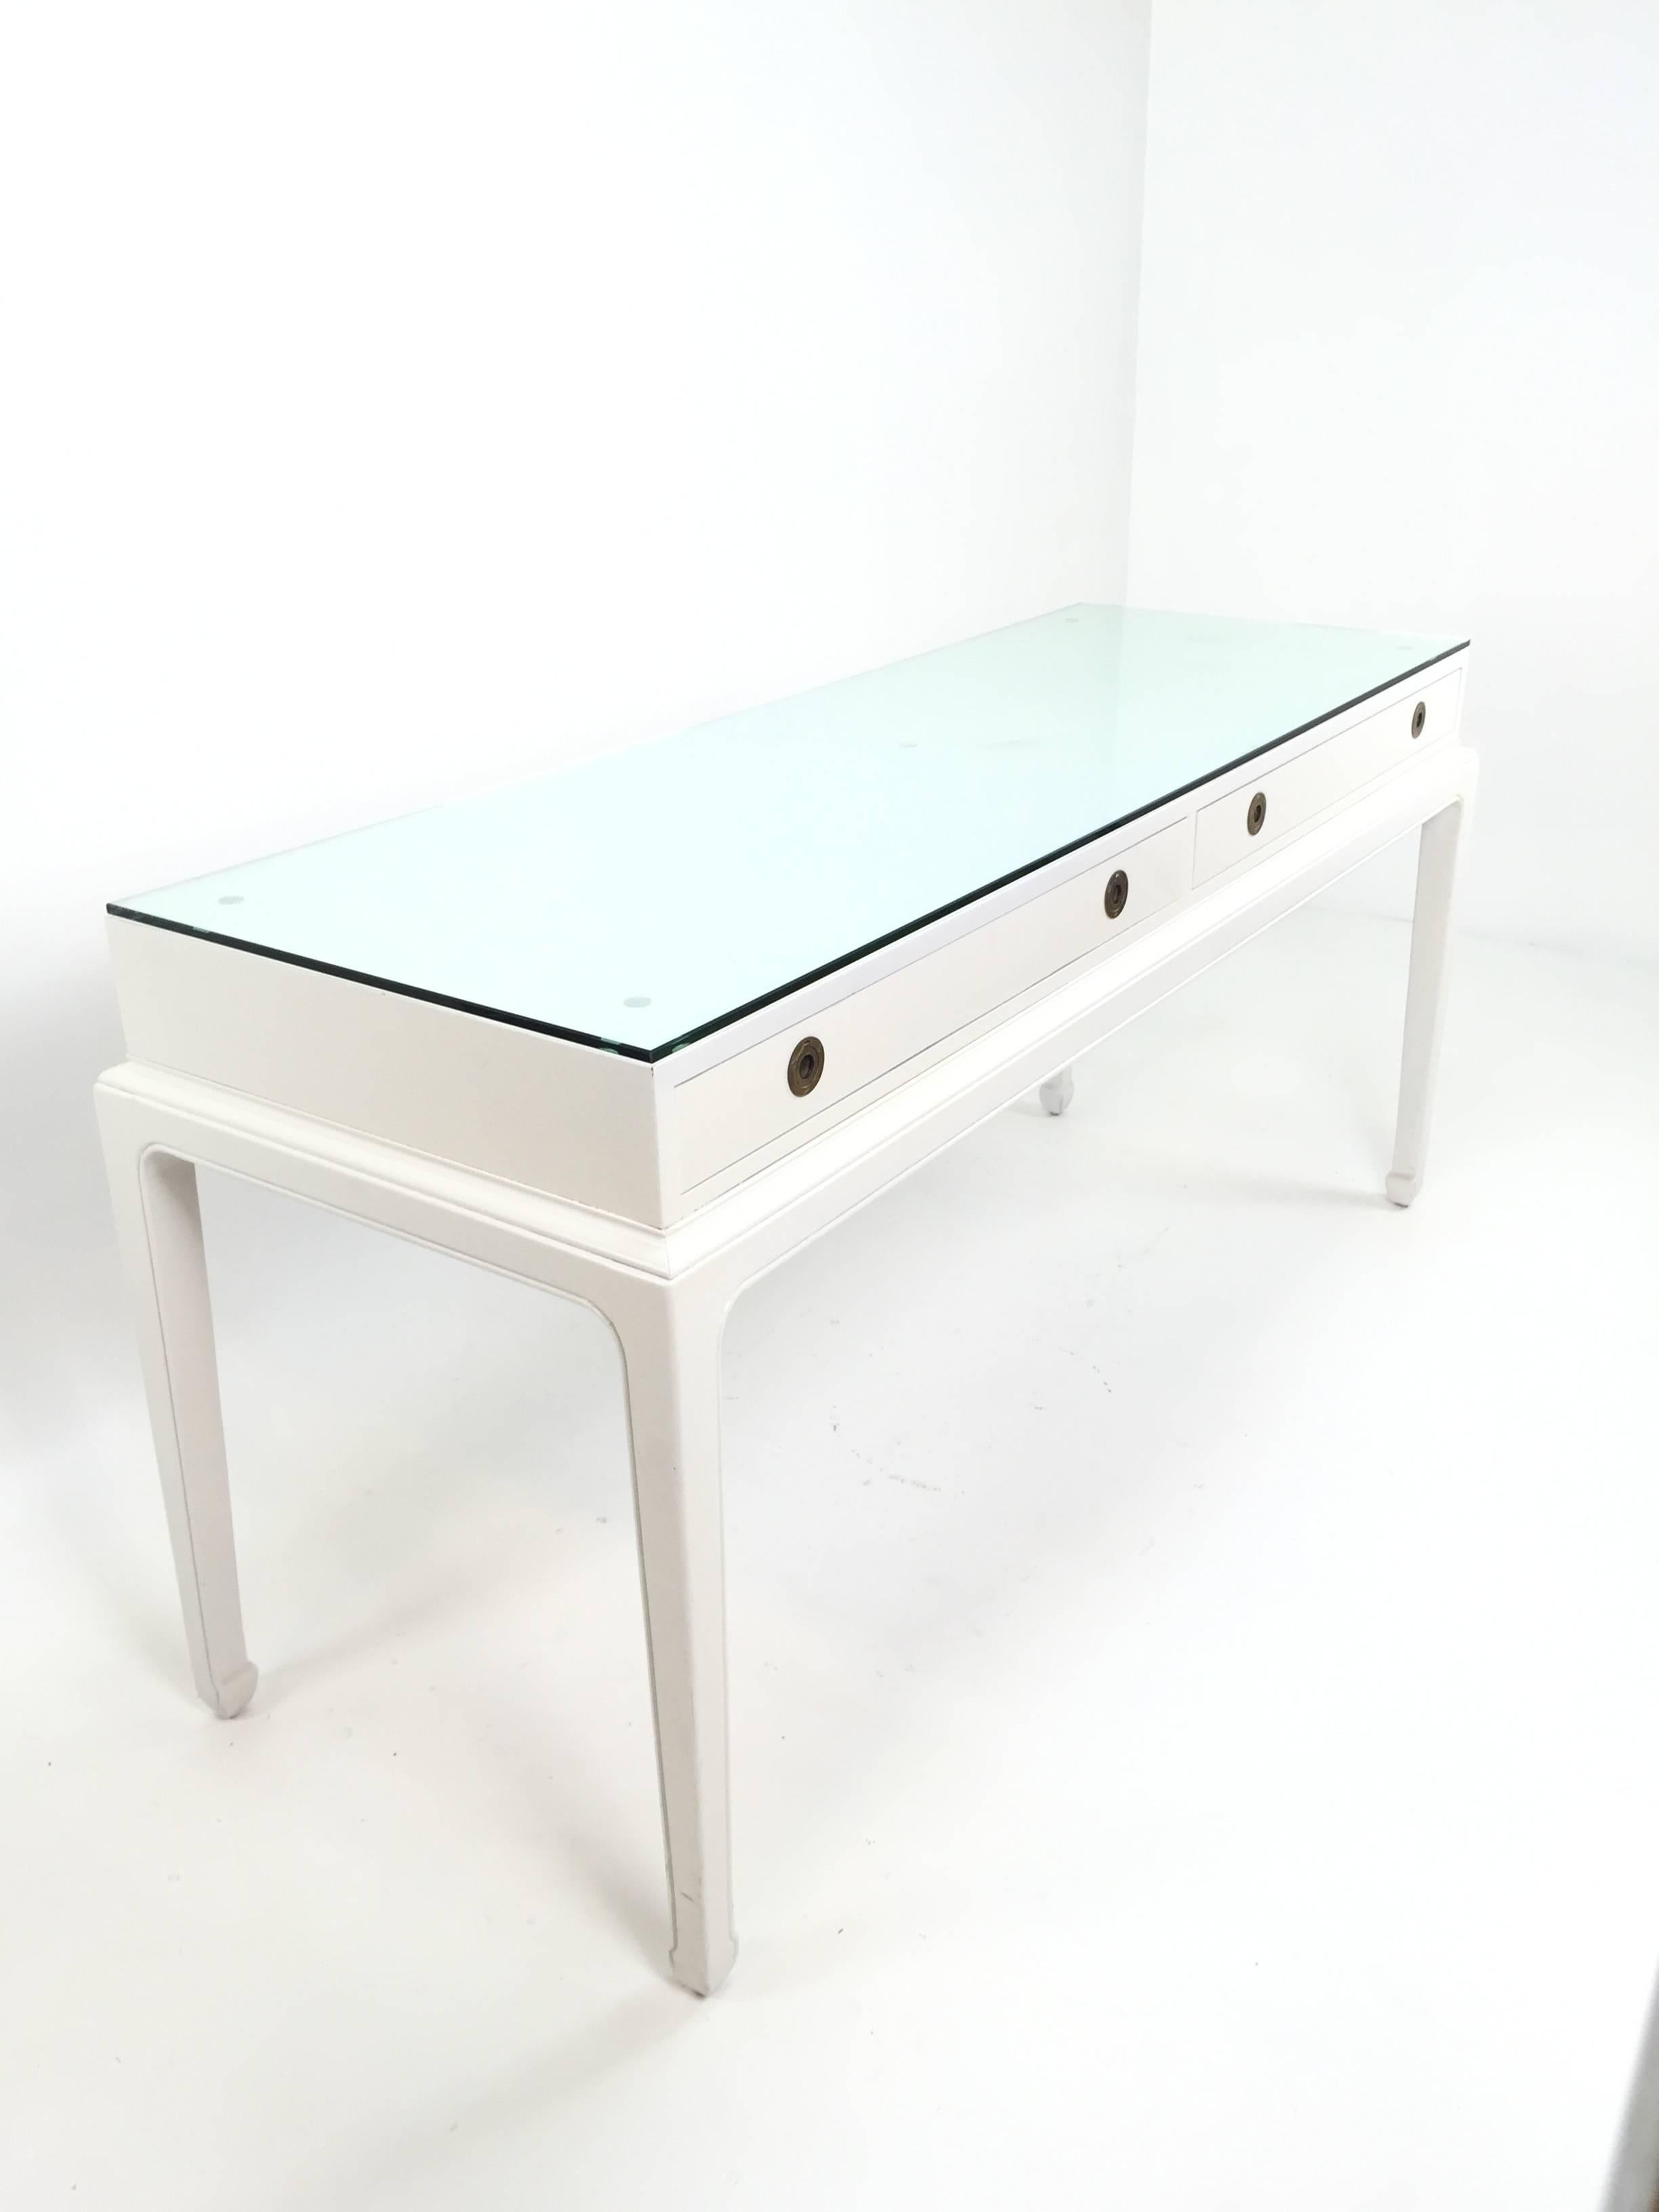 Asian Modern Campaign style desk or console for Henredon. Laquered in antique white. Desk or Console with recessed brass ringlet pulls. Thick glass top (Can be removed.) 